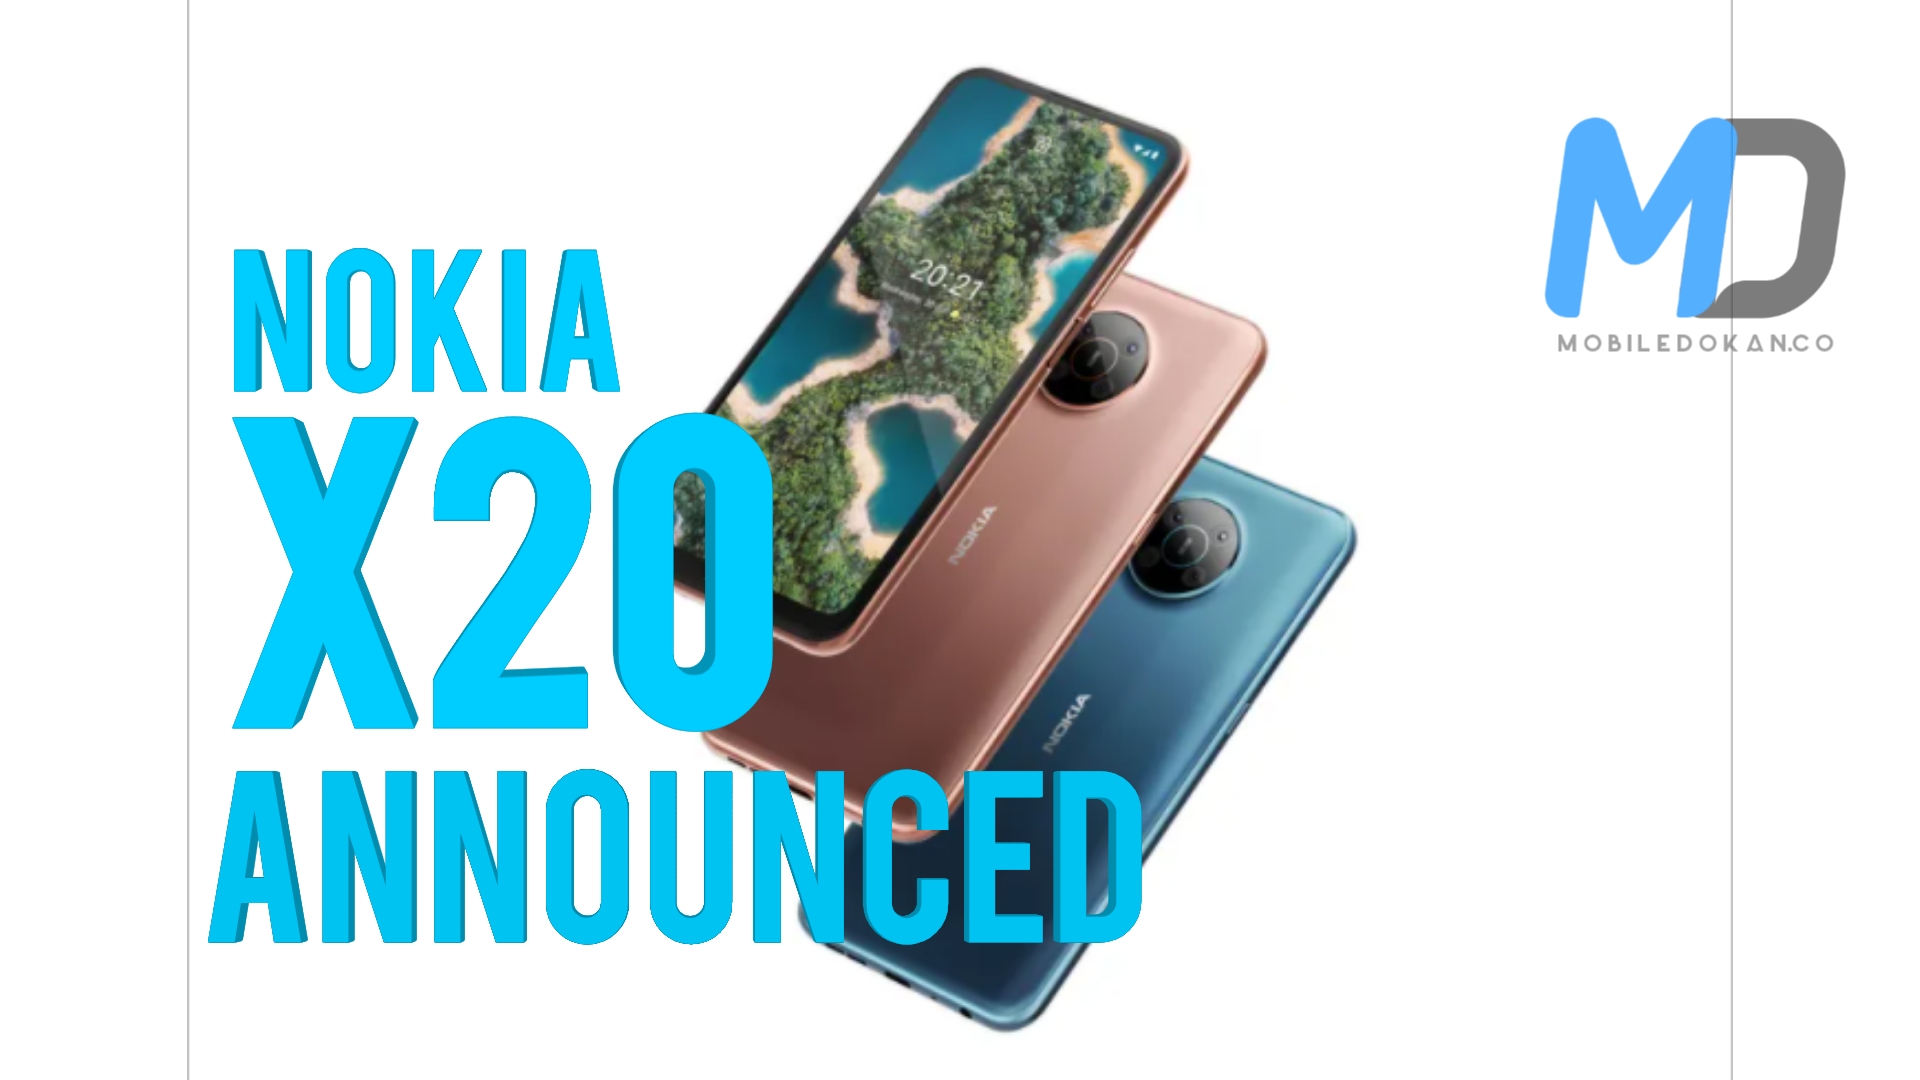 Nokia X20 announced in Kenya with 40,000 KES price tag